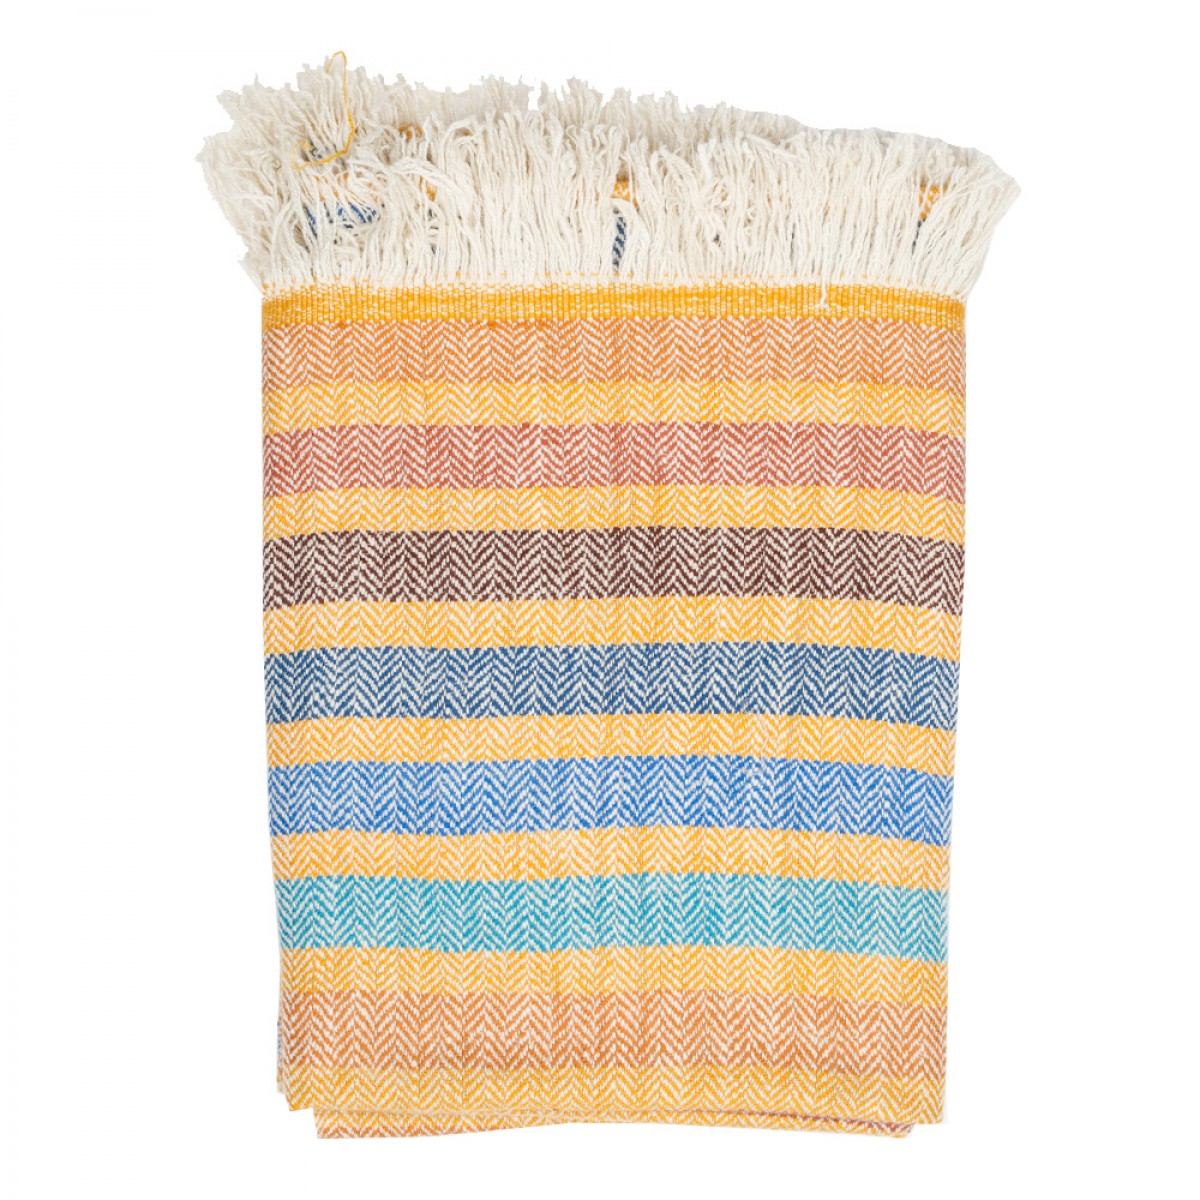 Blue and Yellow Stripes Herringbone Weave Cashmere Blanket (Made to Order)